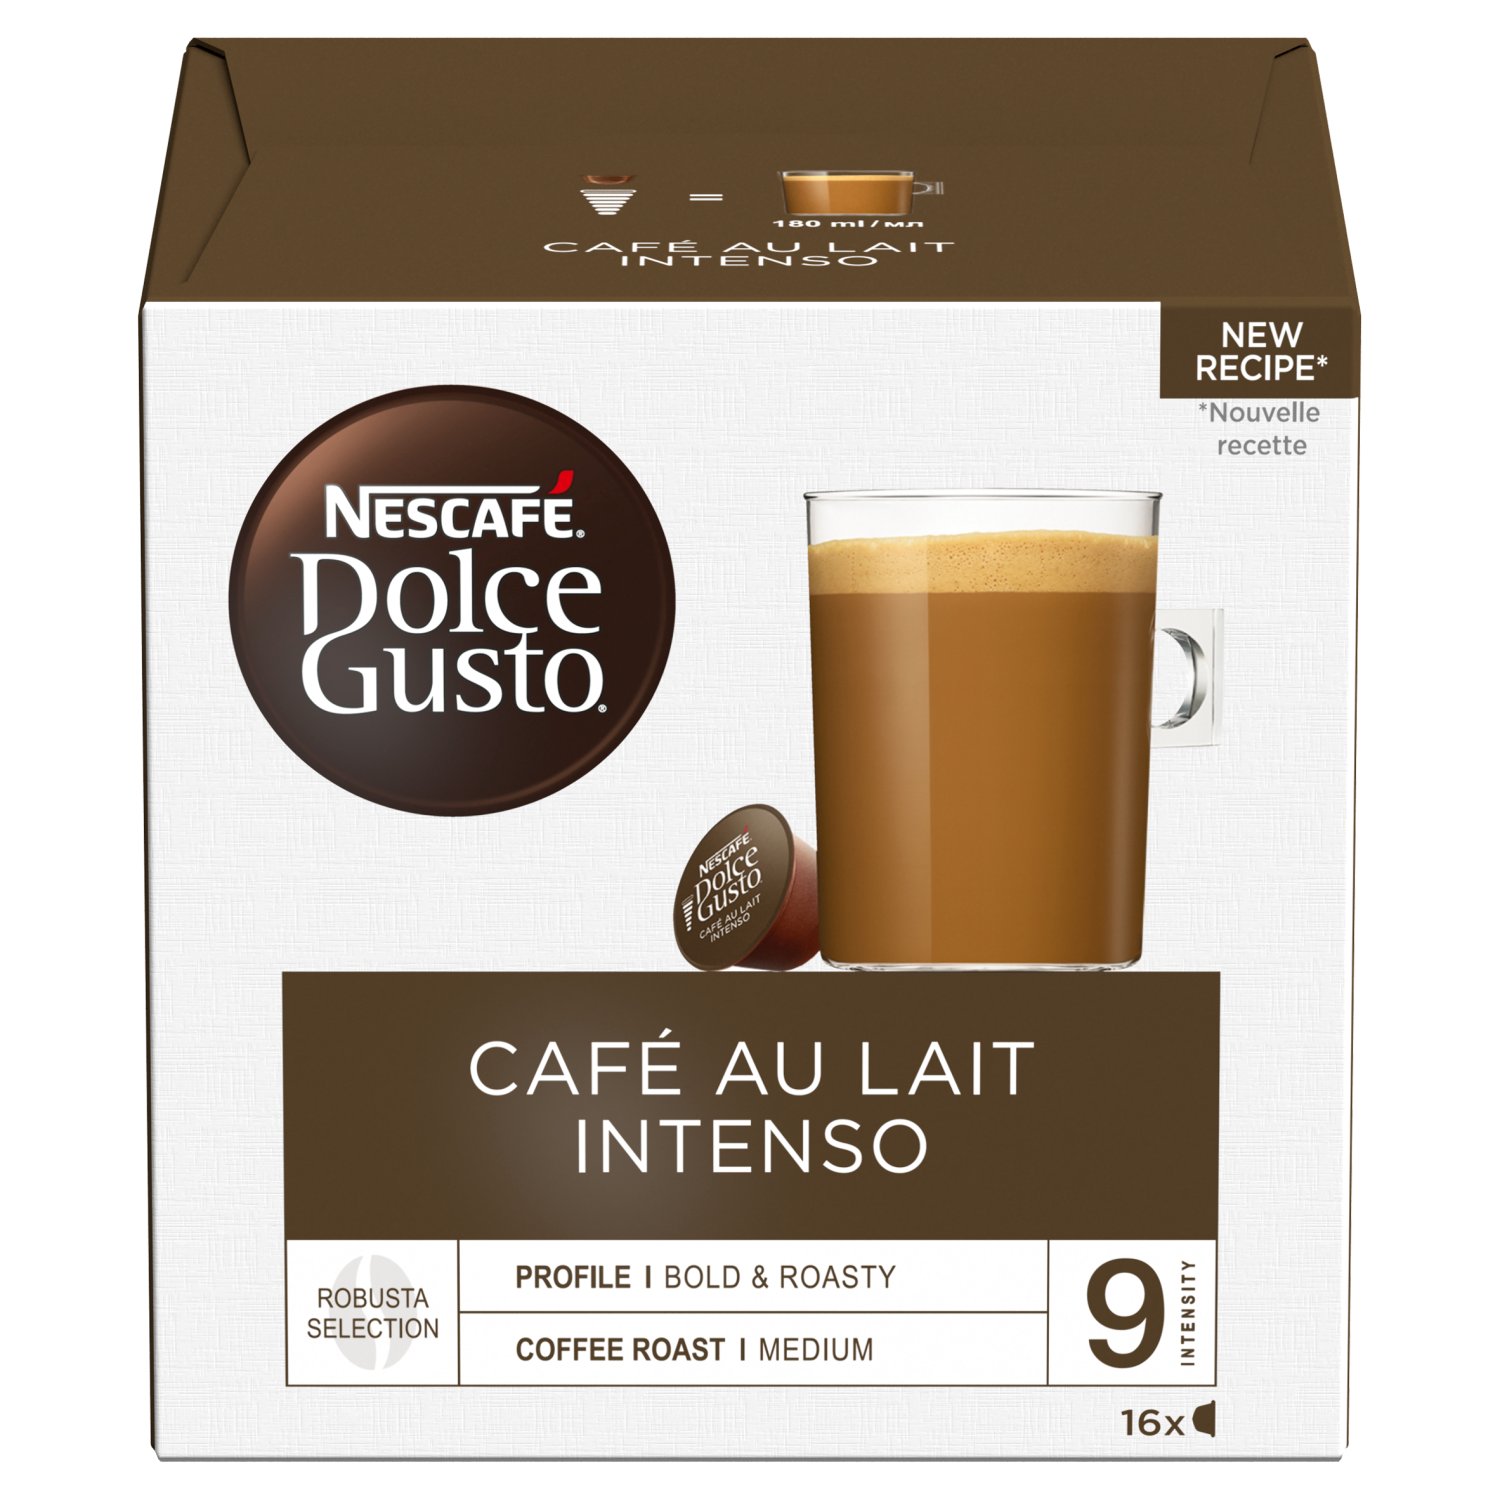 Discover NESCAFÉ® Dolce Gusto® Café au Lait, a harmonious balance of intense coffee and smooth milk, already prepared in a single capsule, for you to enjoy perfect mug-sized coffee (180 ml) in a minute.

The box contains 16 capsules designed for NESCAFÉ® Dolce Gusto®' capsule coffee machines for you to prepare 16 mugs of Café au Lait.